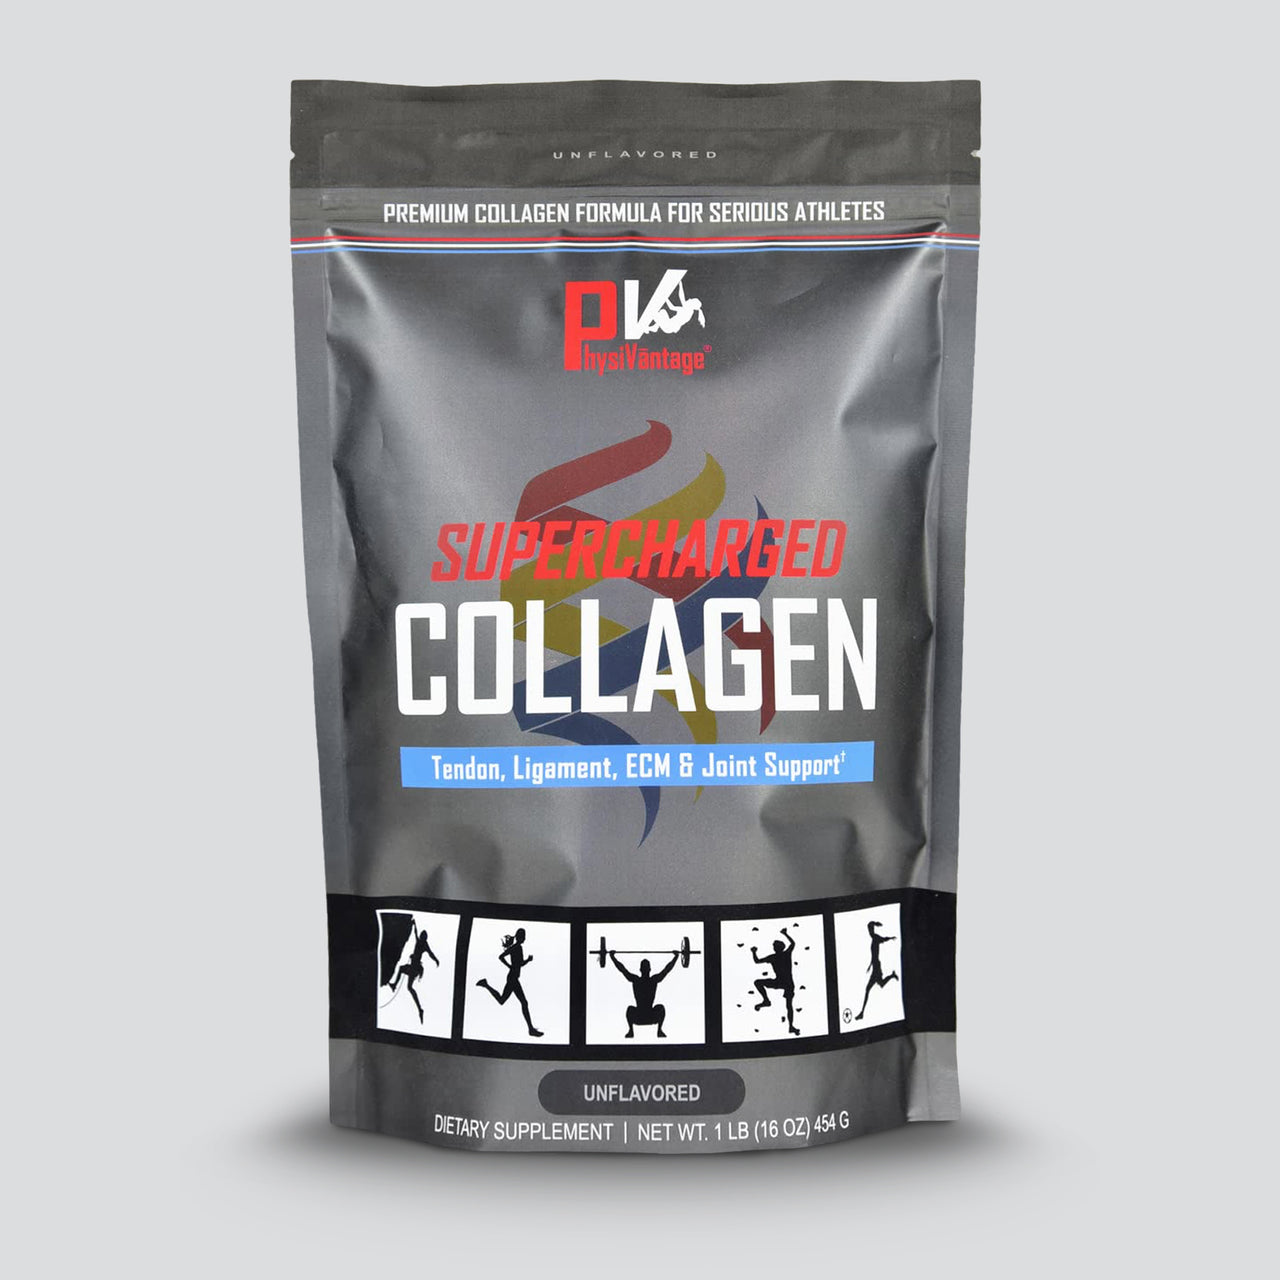 PhysiVantage Supercharged Collagen